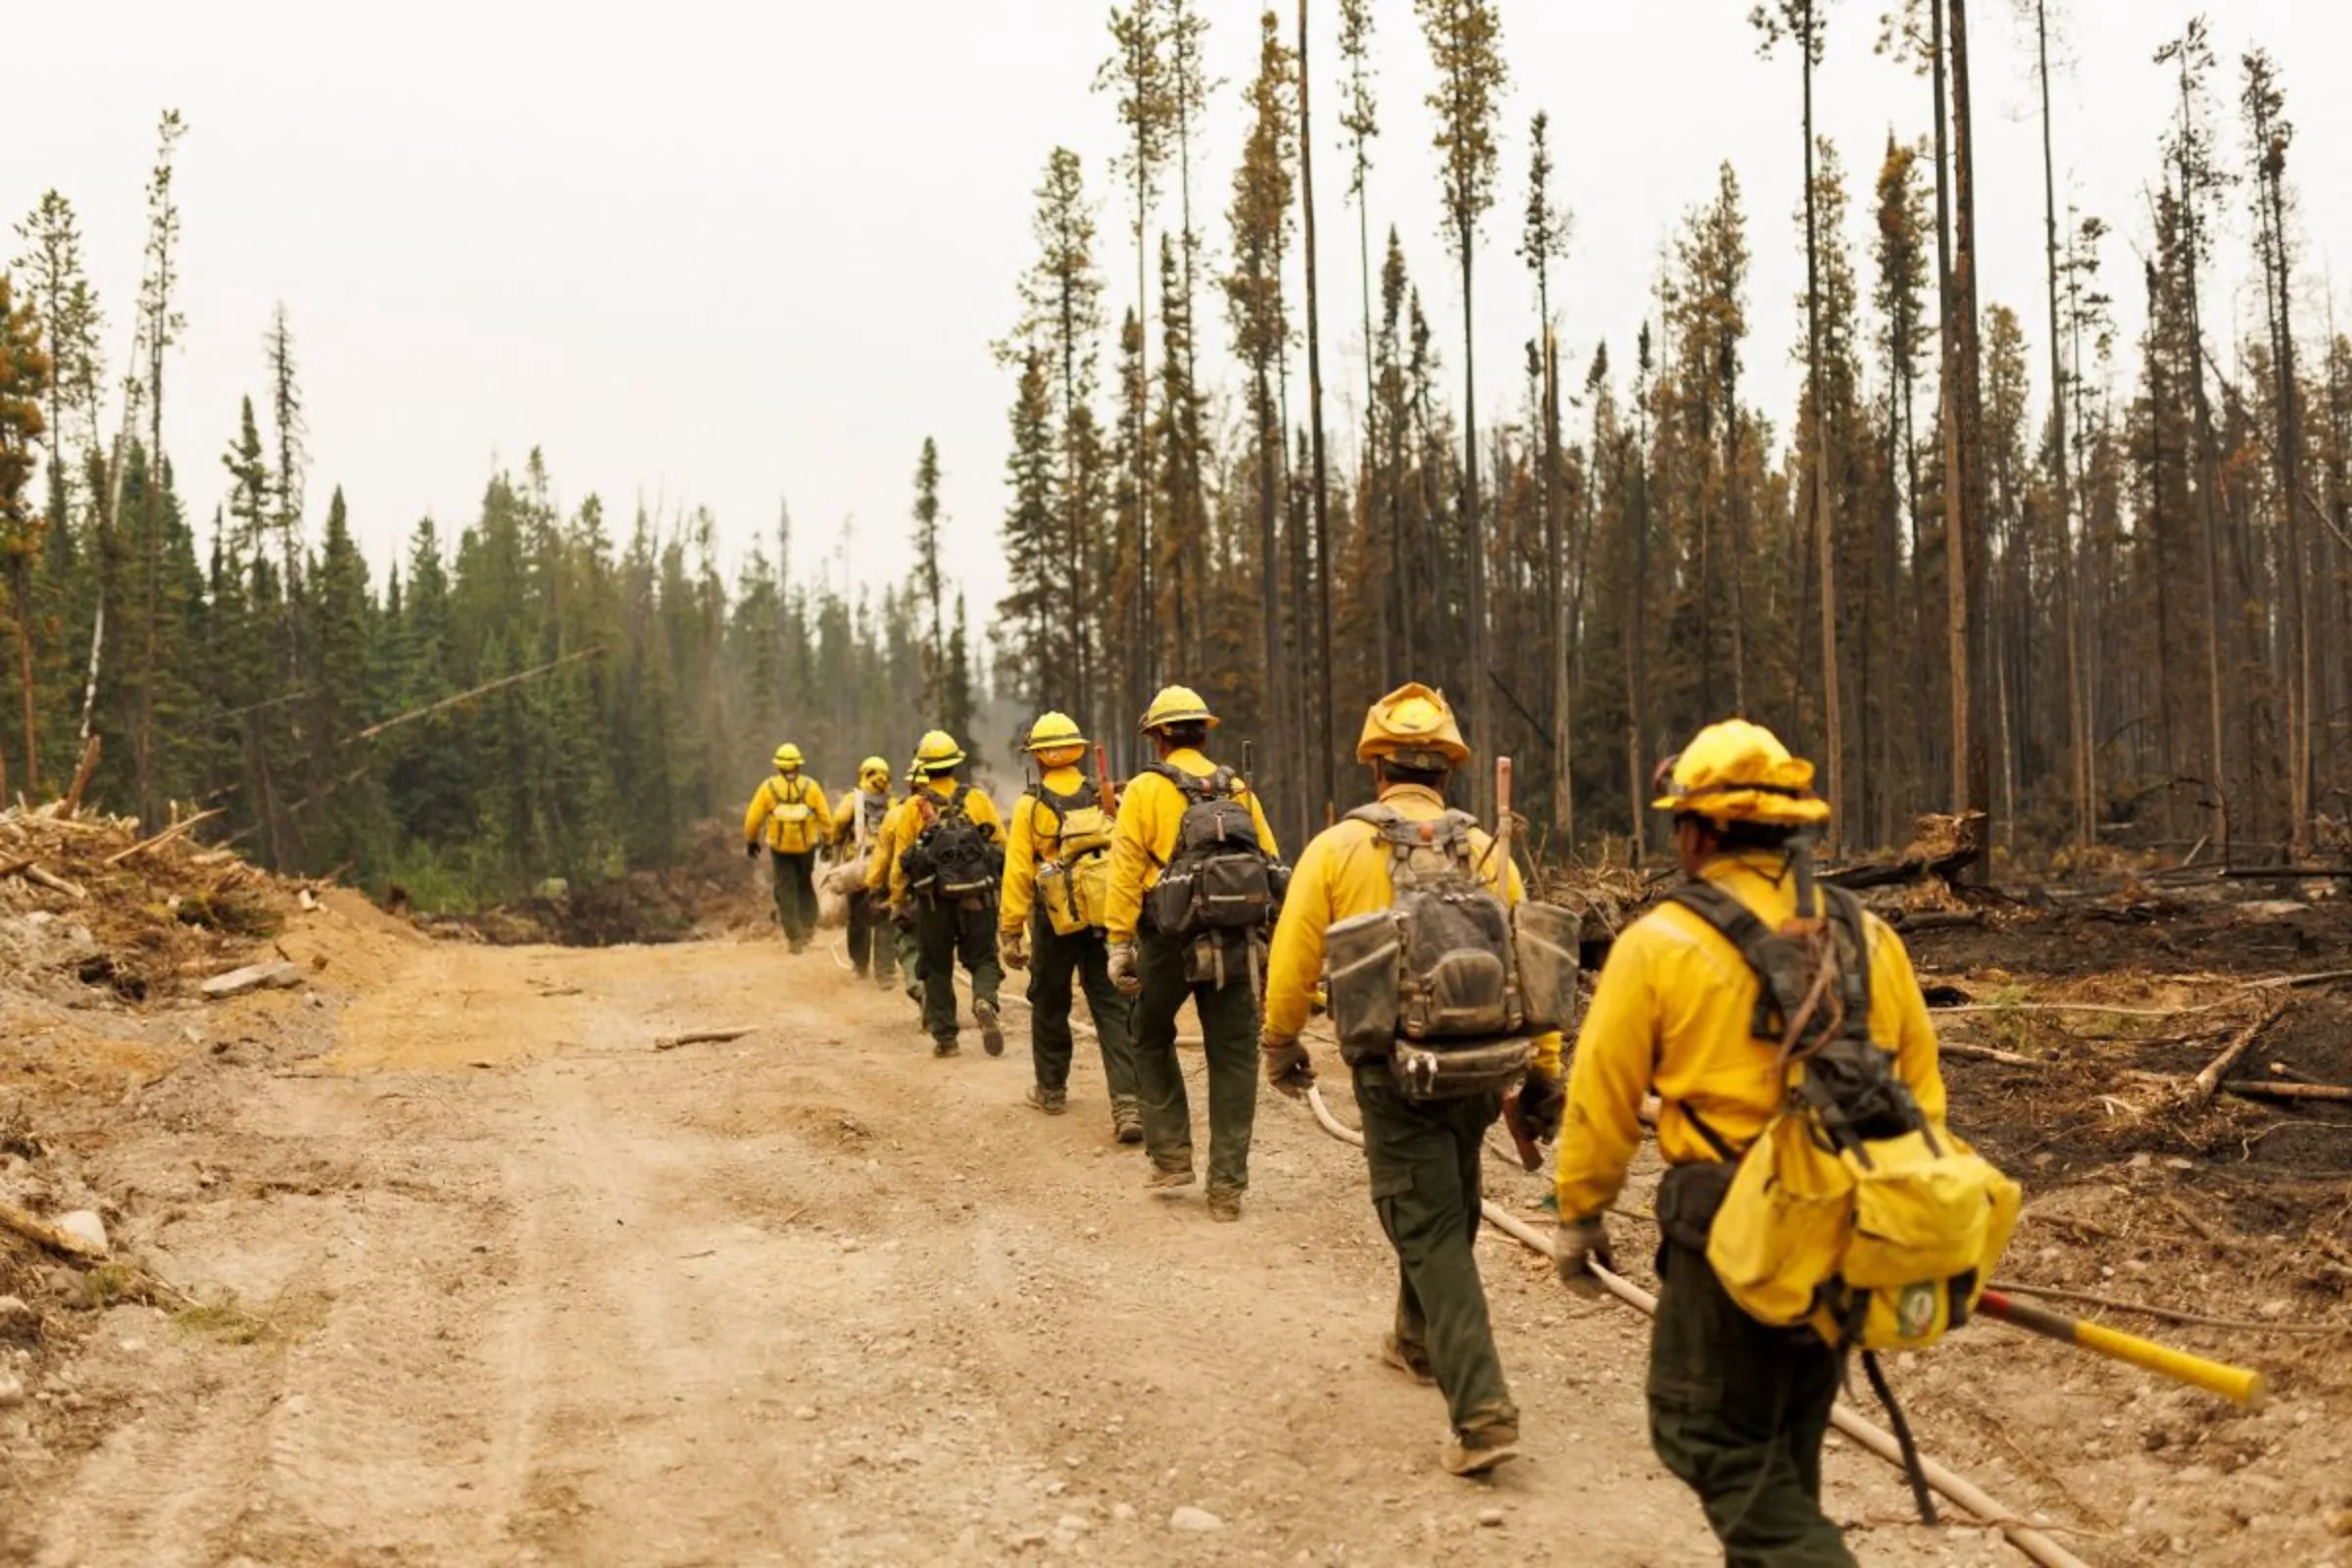 Firefighters from Mexico march along a fire guard as they battle wildfires near Vanderhoof, British Columbia, Canada July 13, 2023